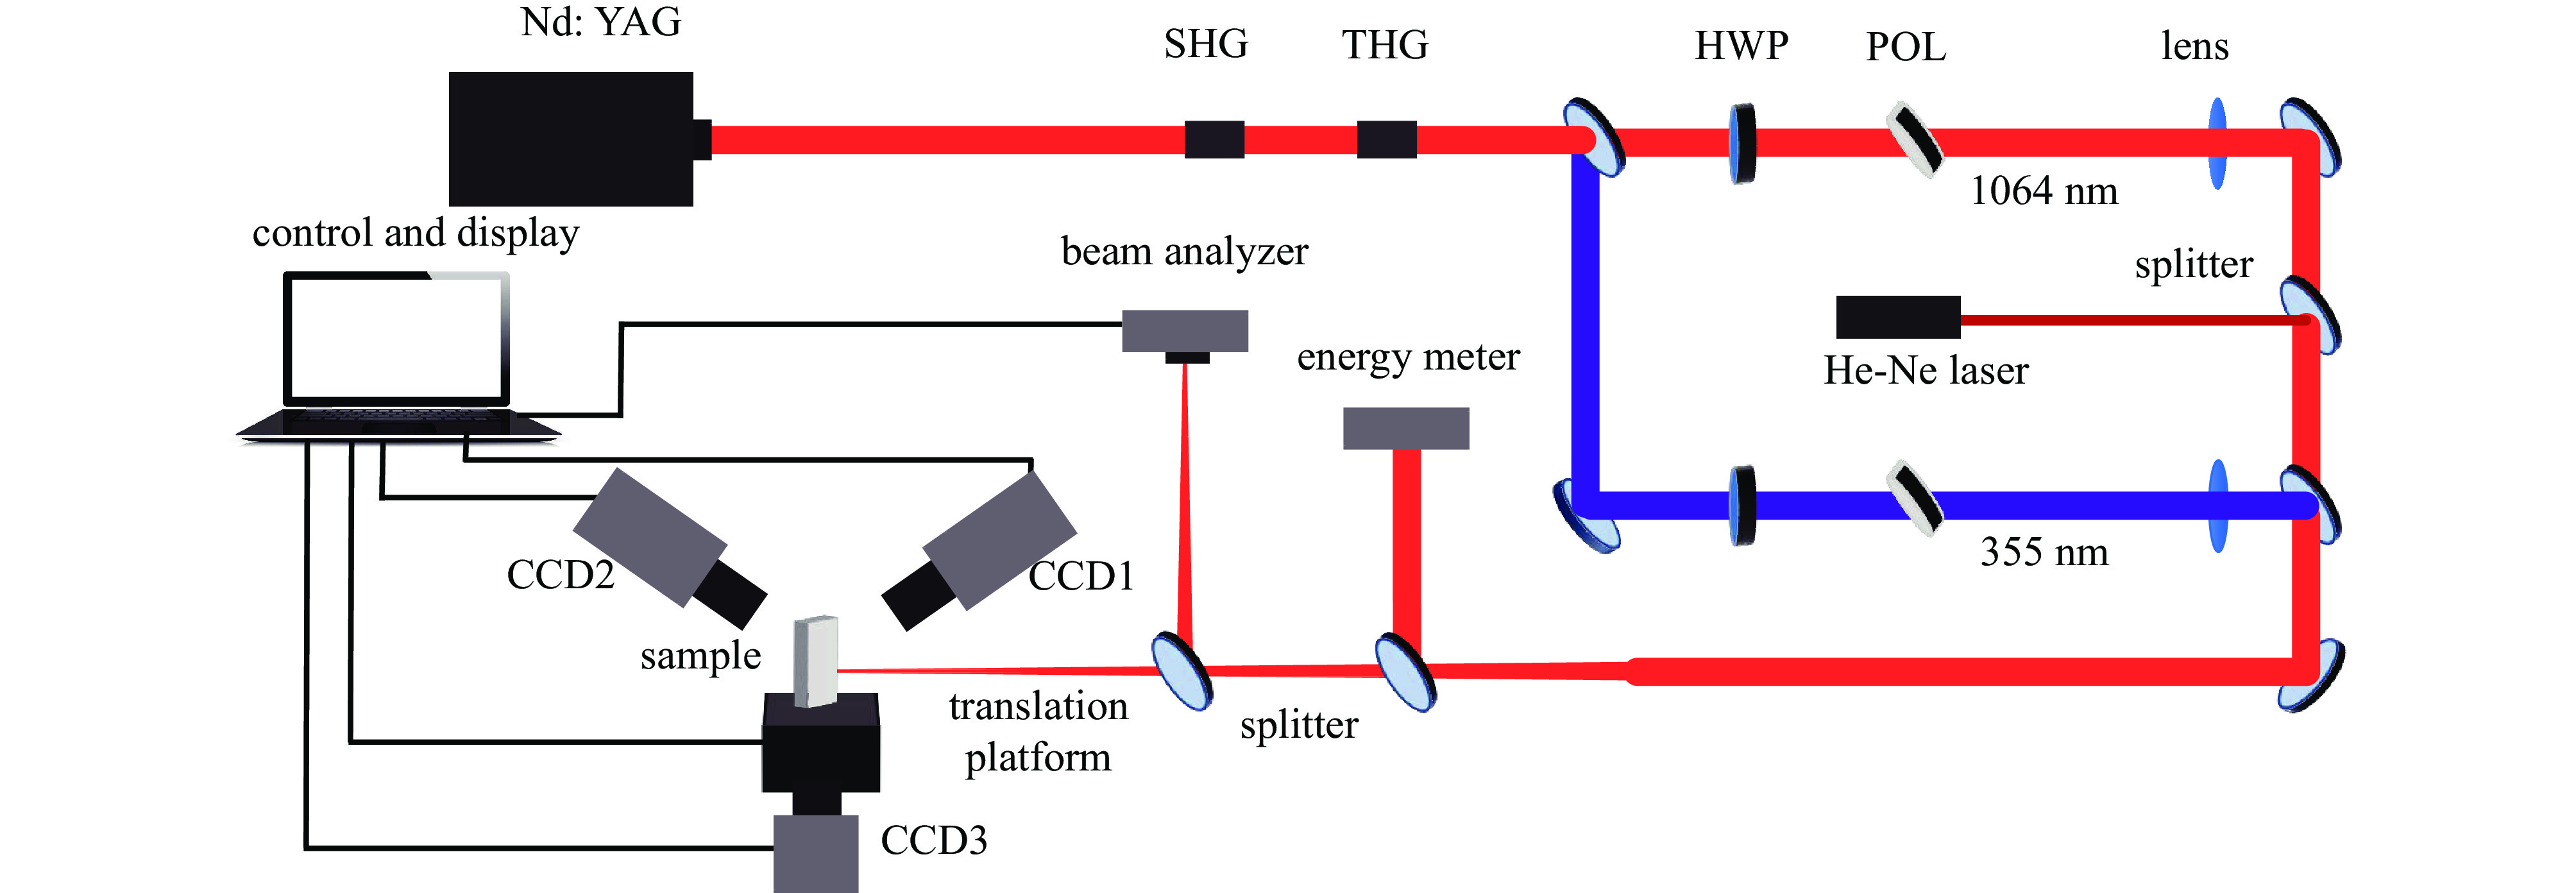 Schematic of laser induced damage experimental system